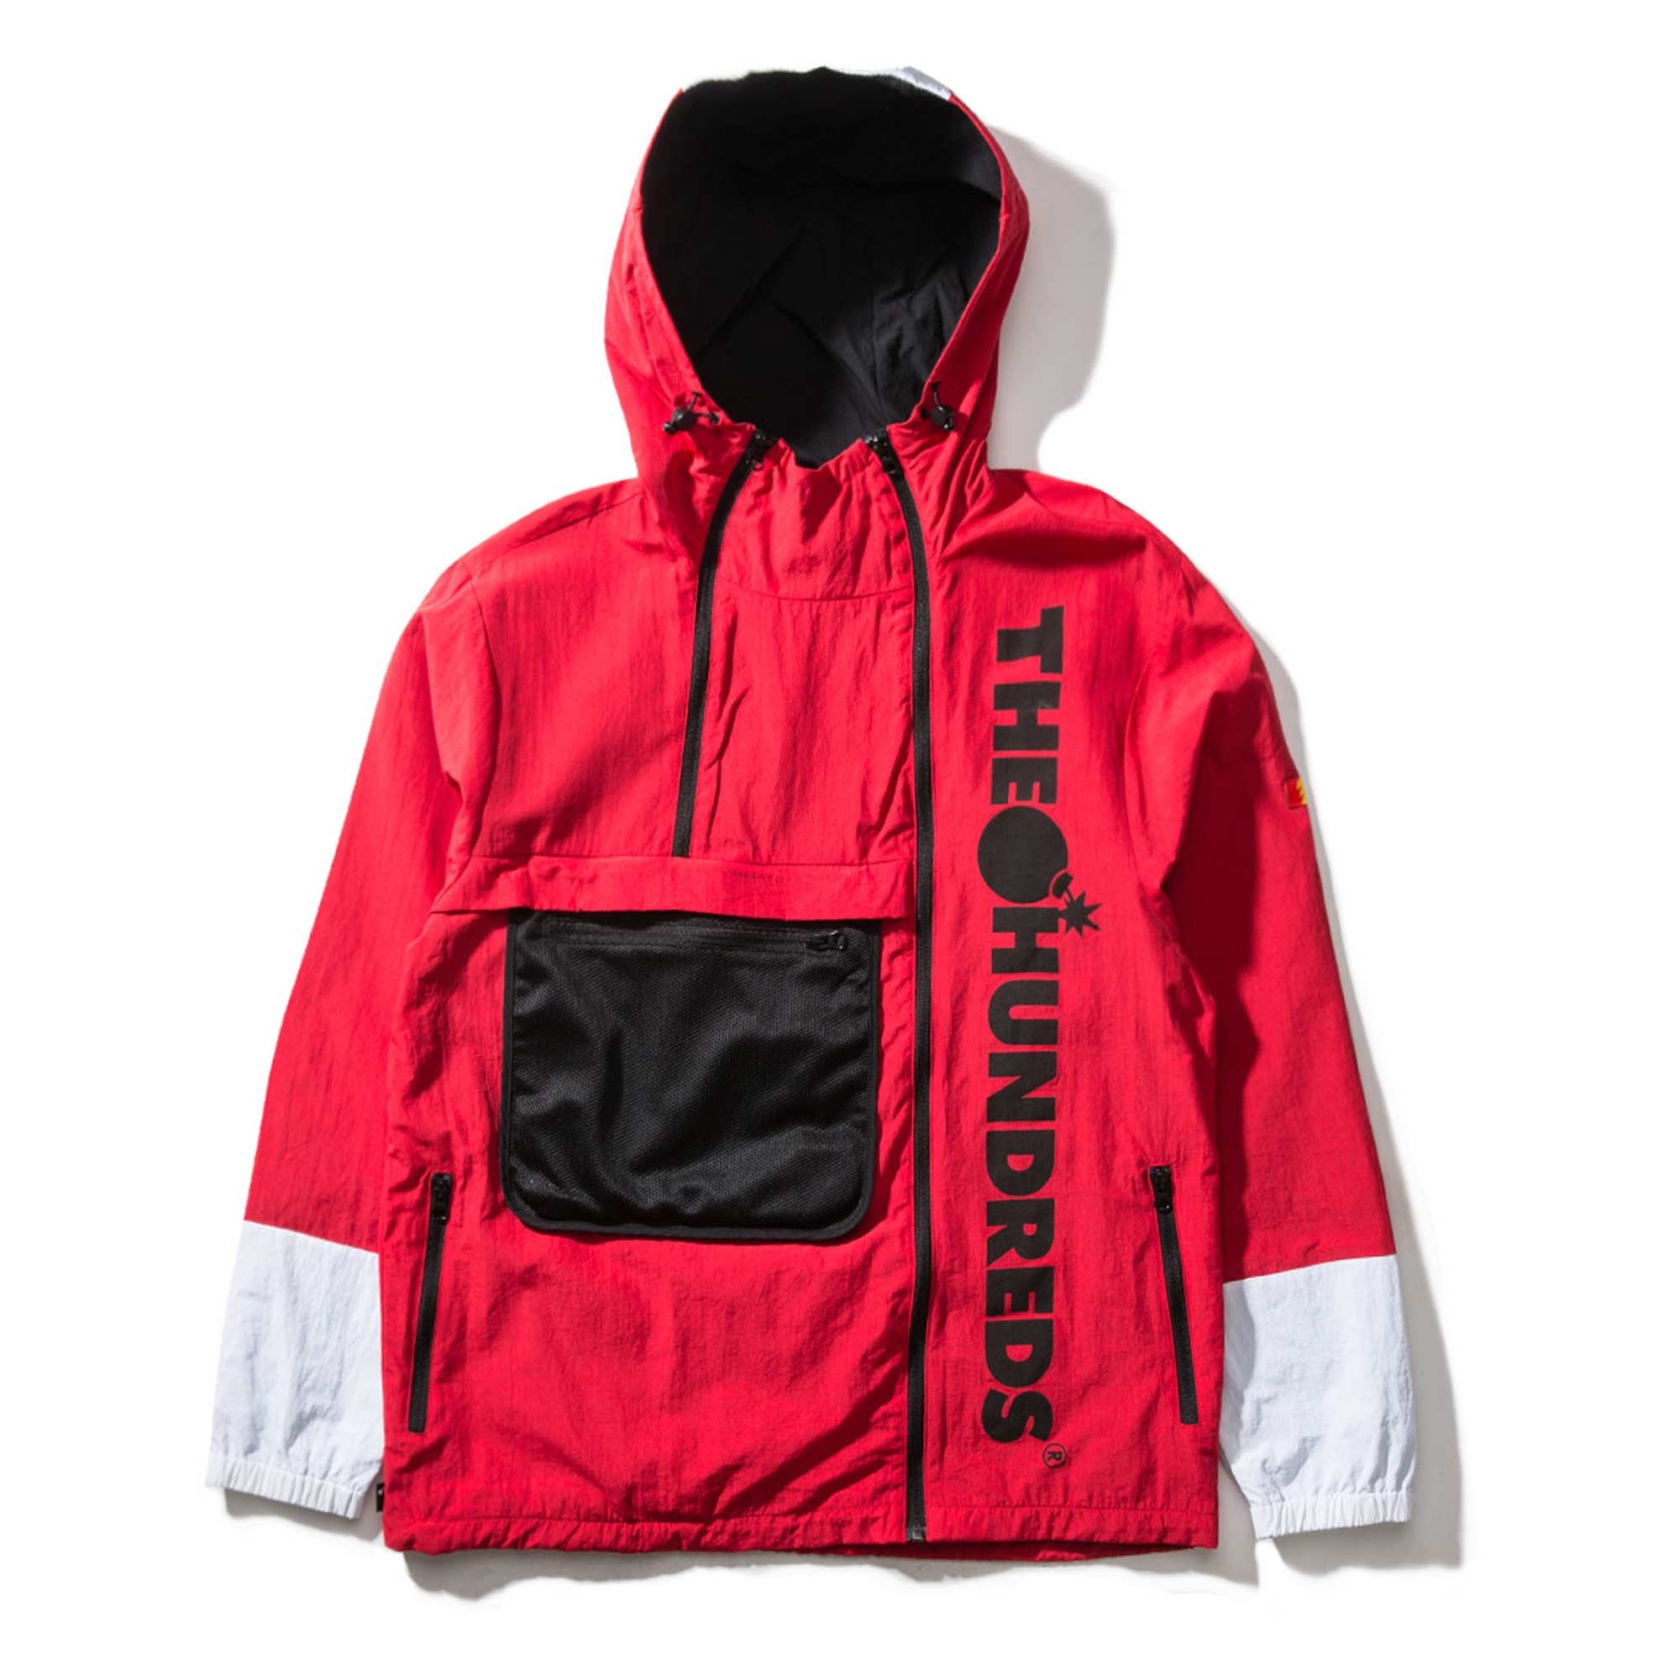 THE HUNDREDS Jacket TERRAIN bright red